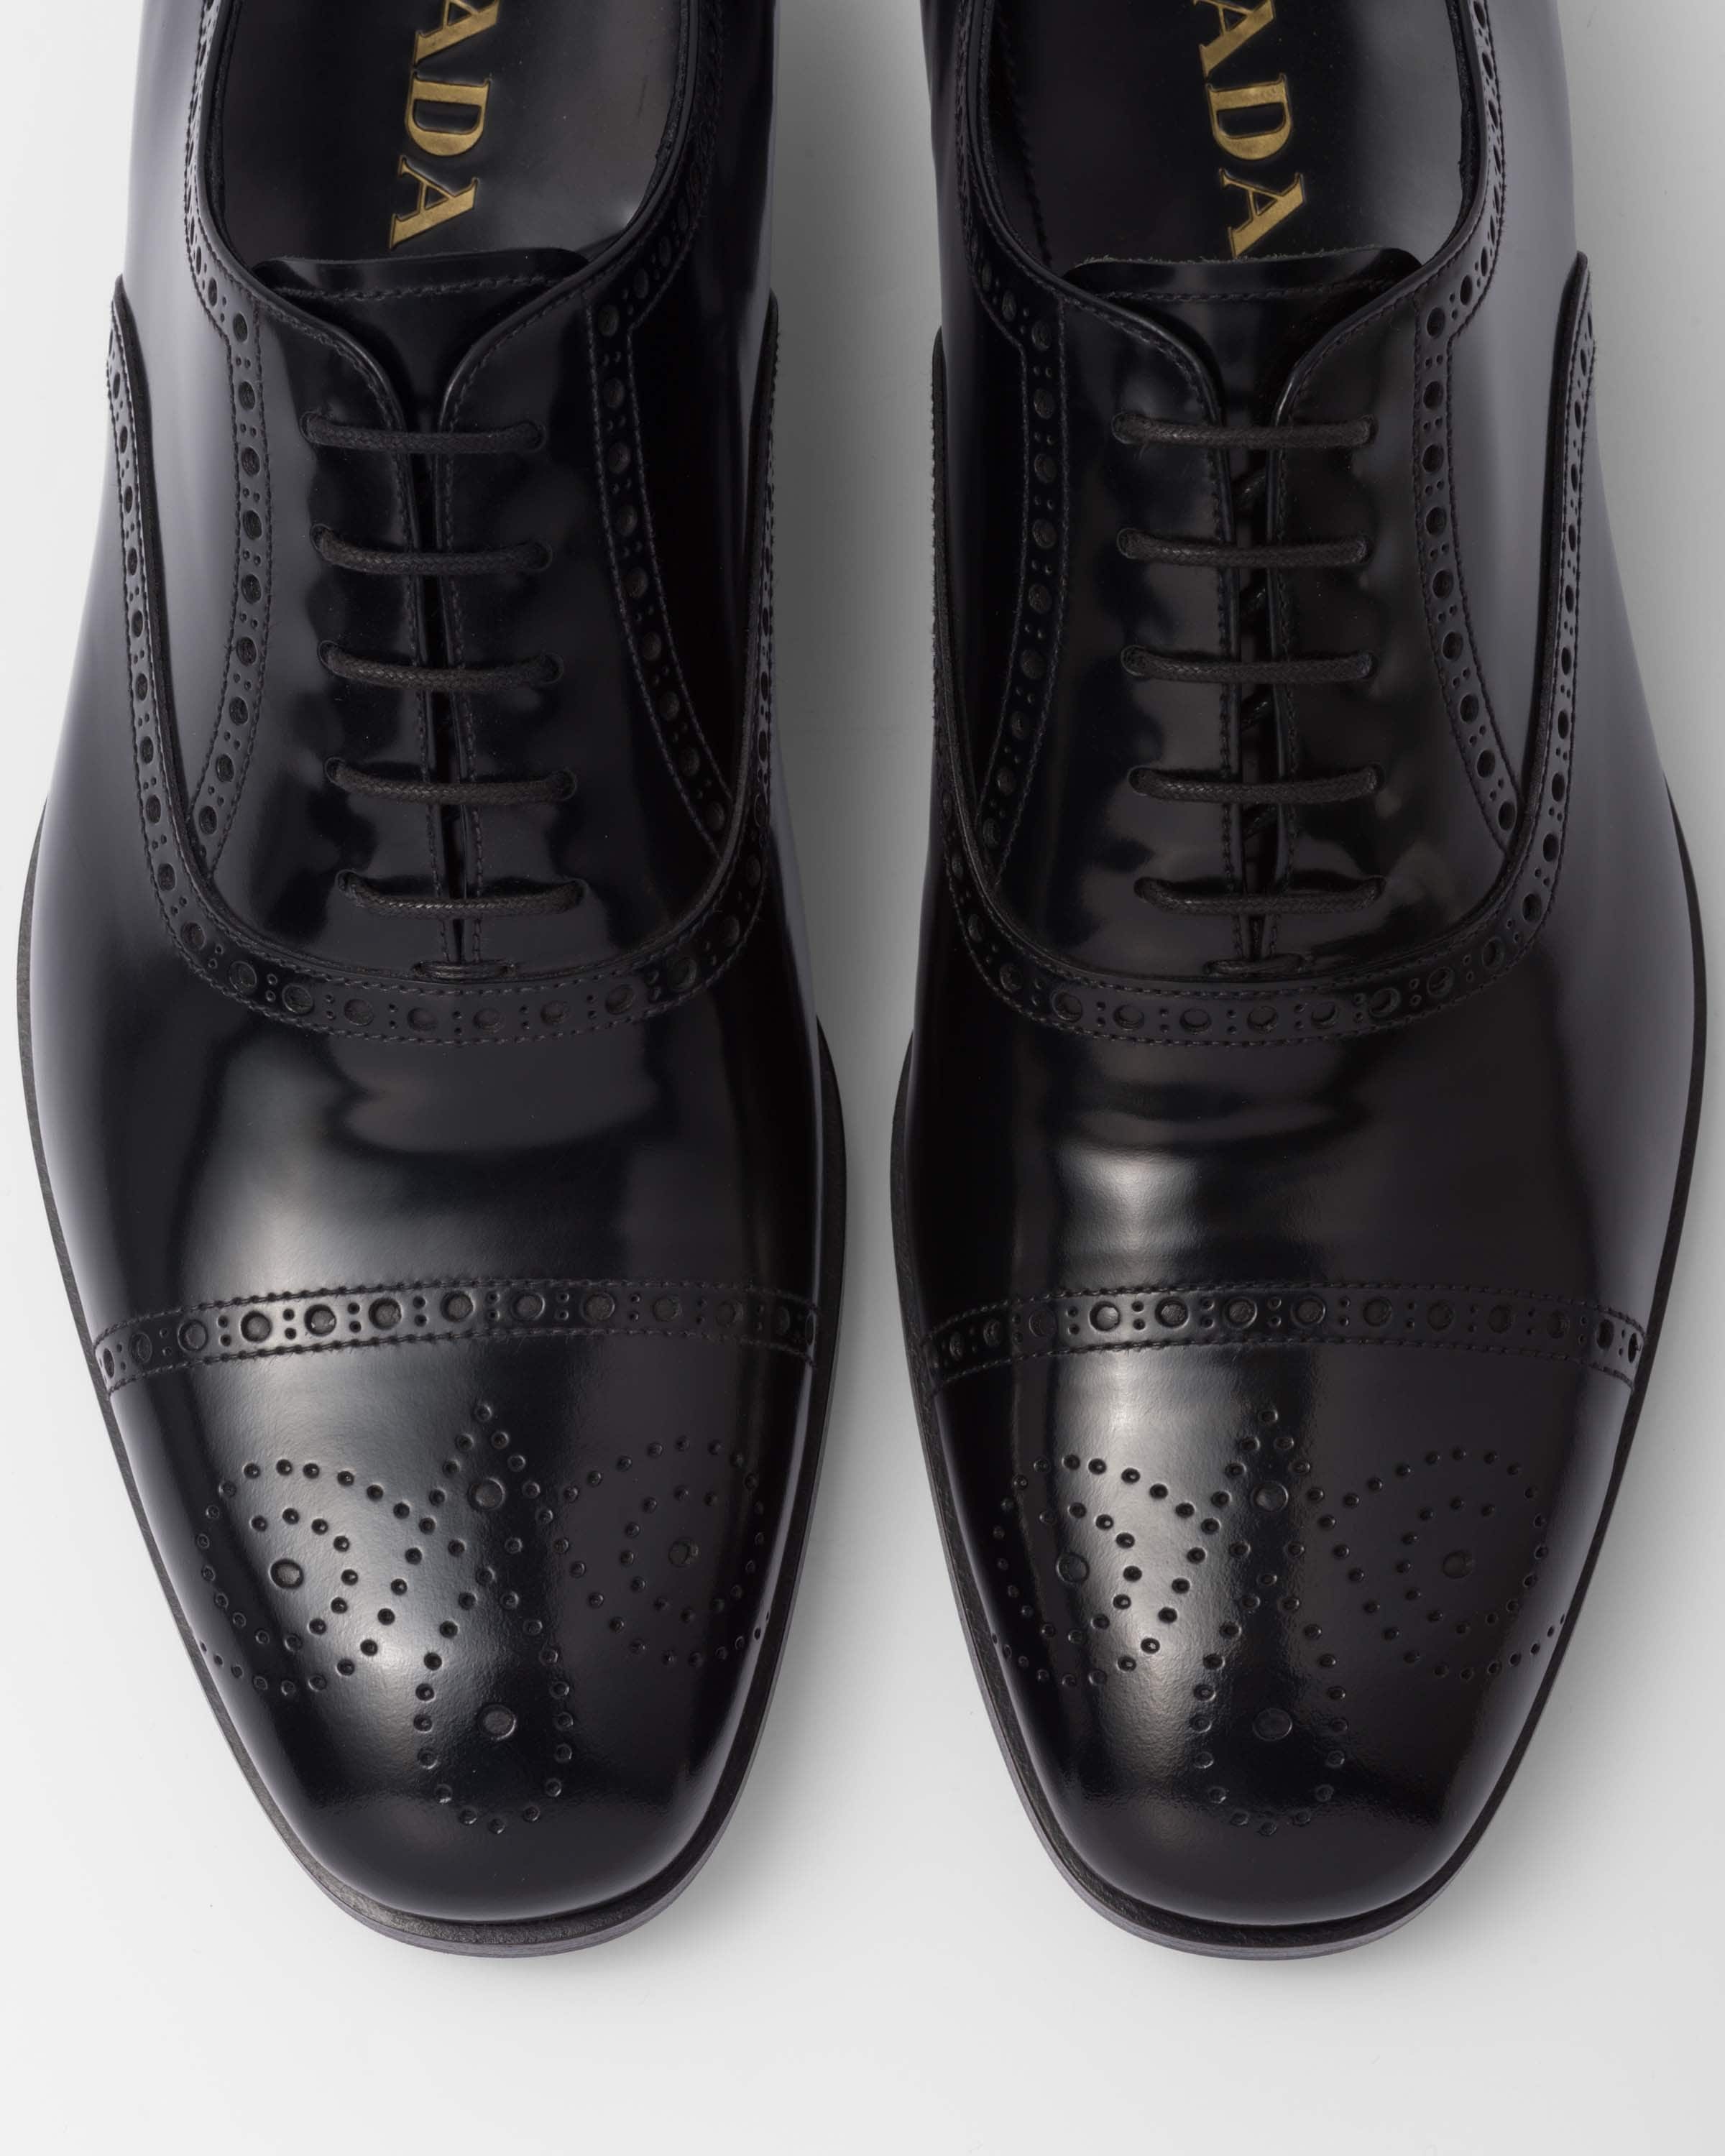 Prada Brushed Leather Oxford Brogue Shoes | REVERSIBLE